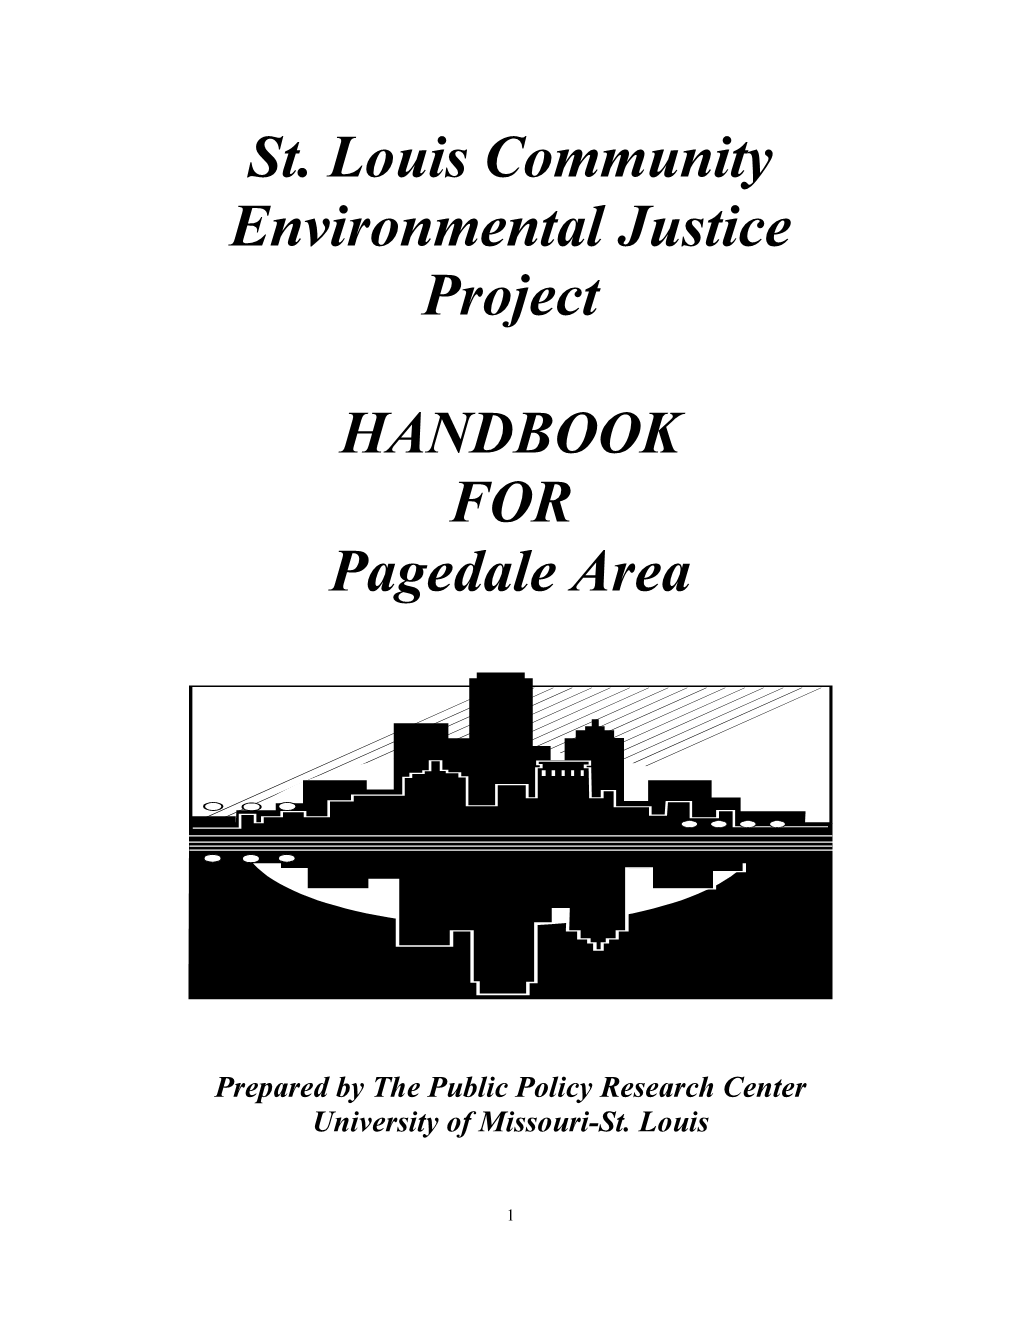 St. Louis Community Environmental Justice Project HANDBOOK FOR